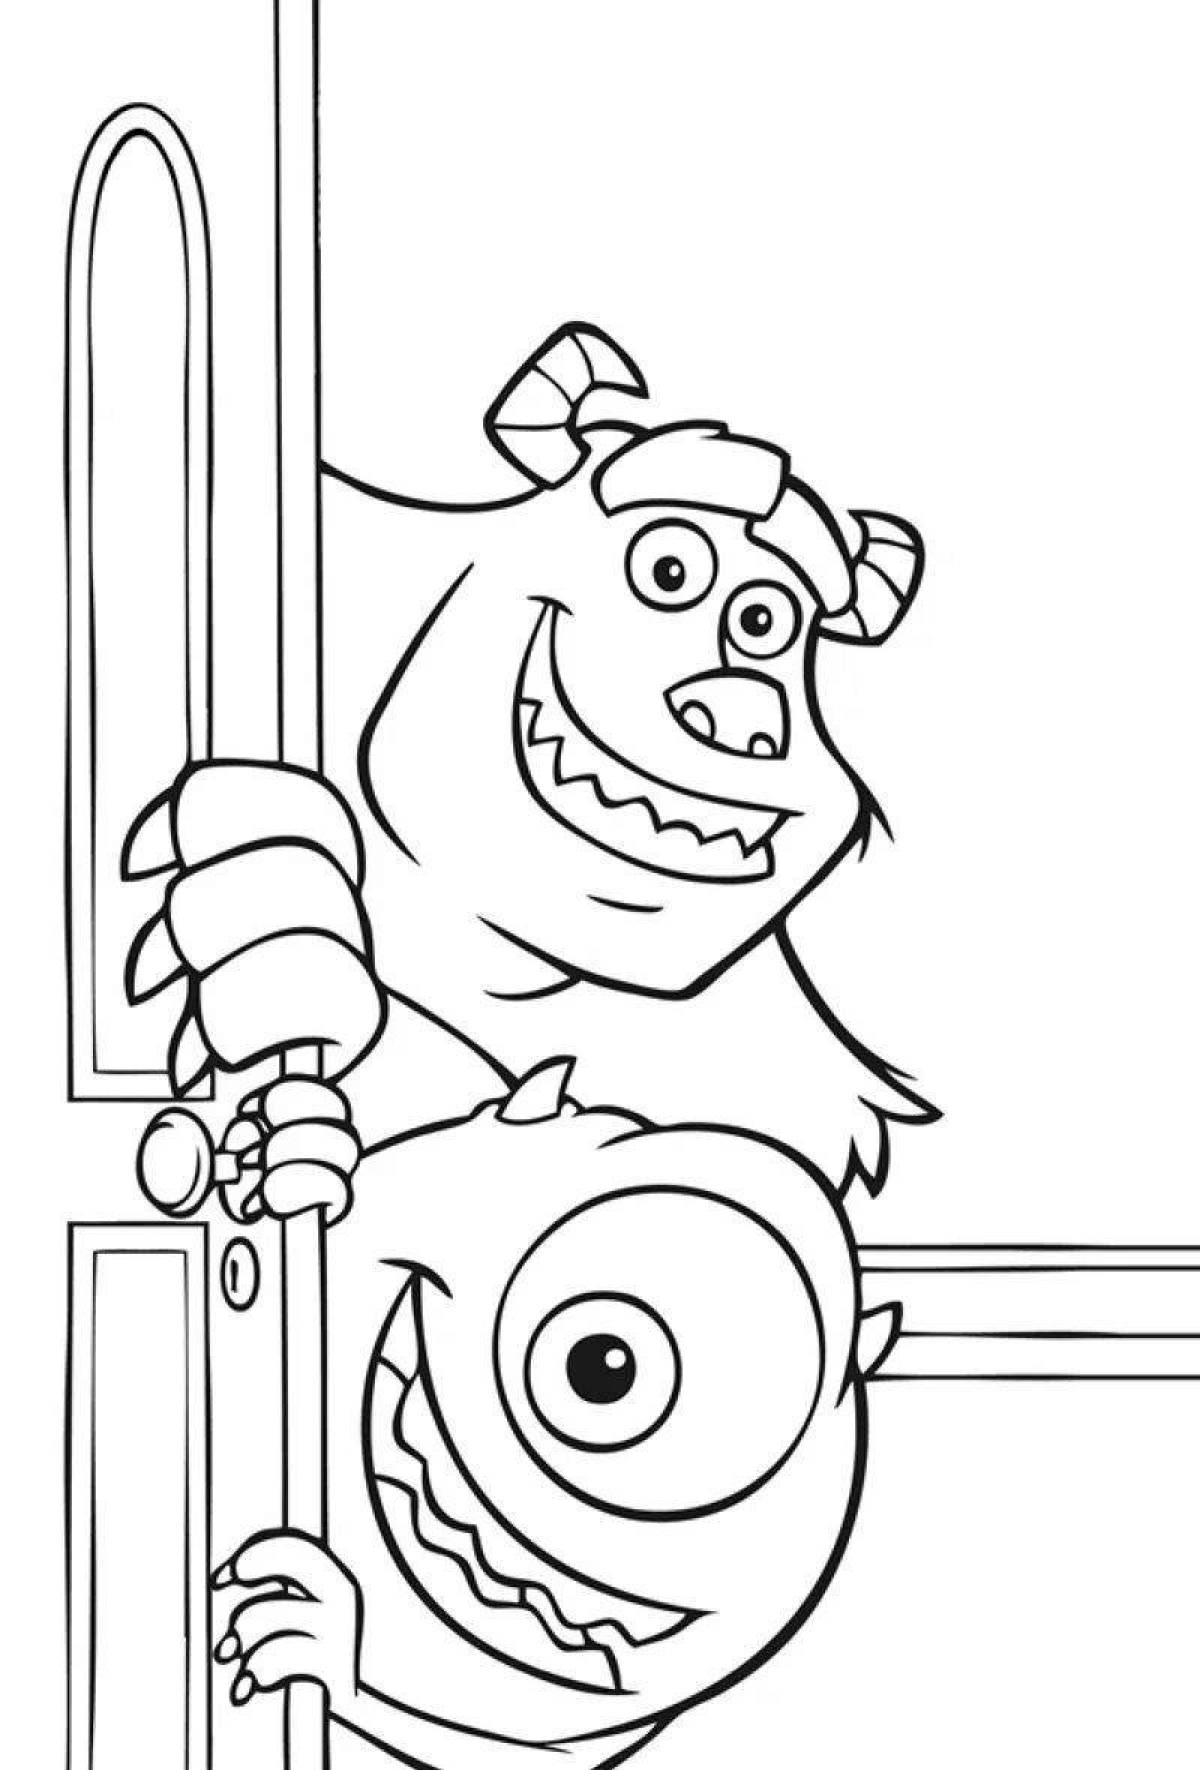 Sally and Boo coloring pages, crazy colors